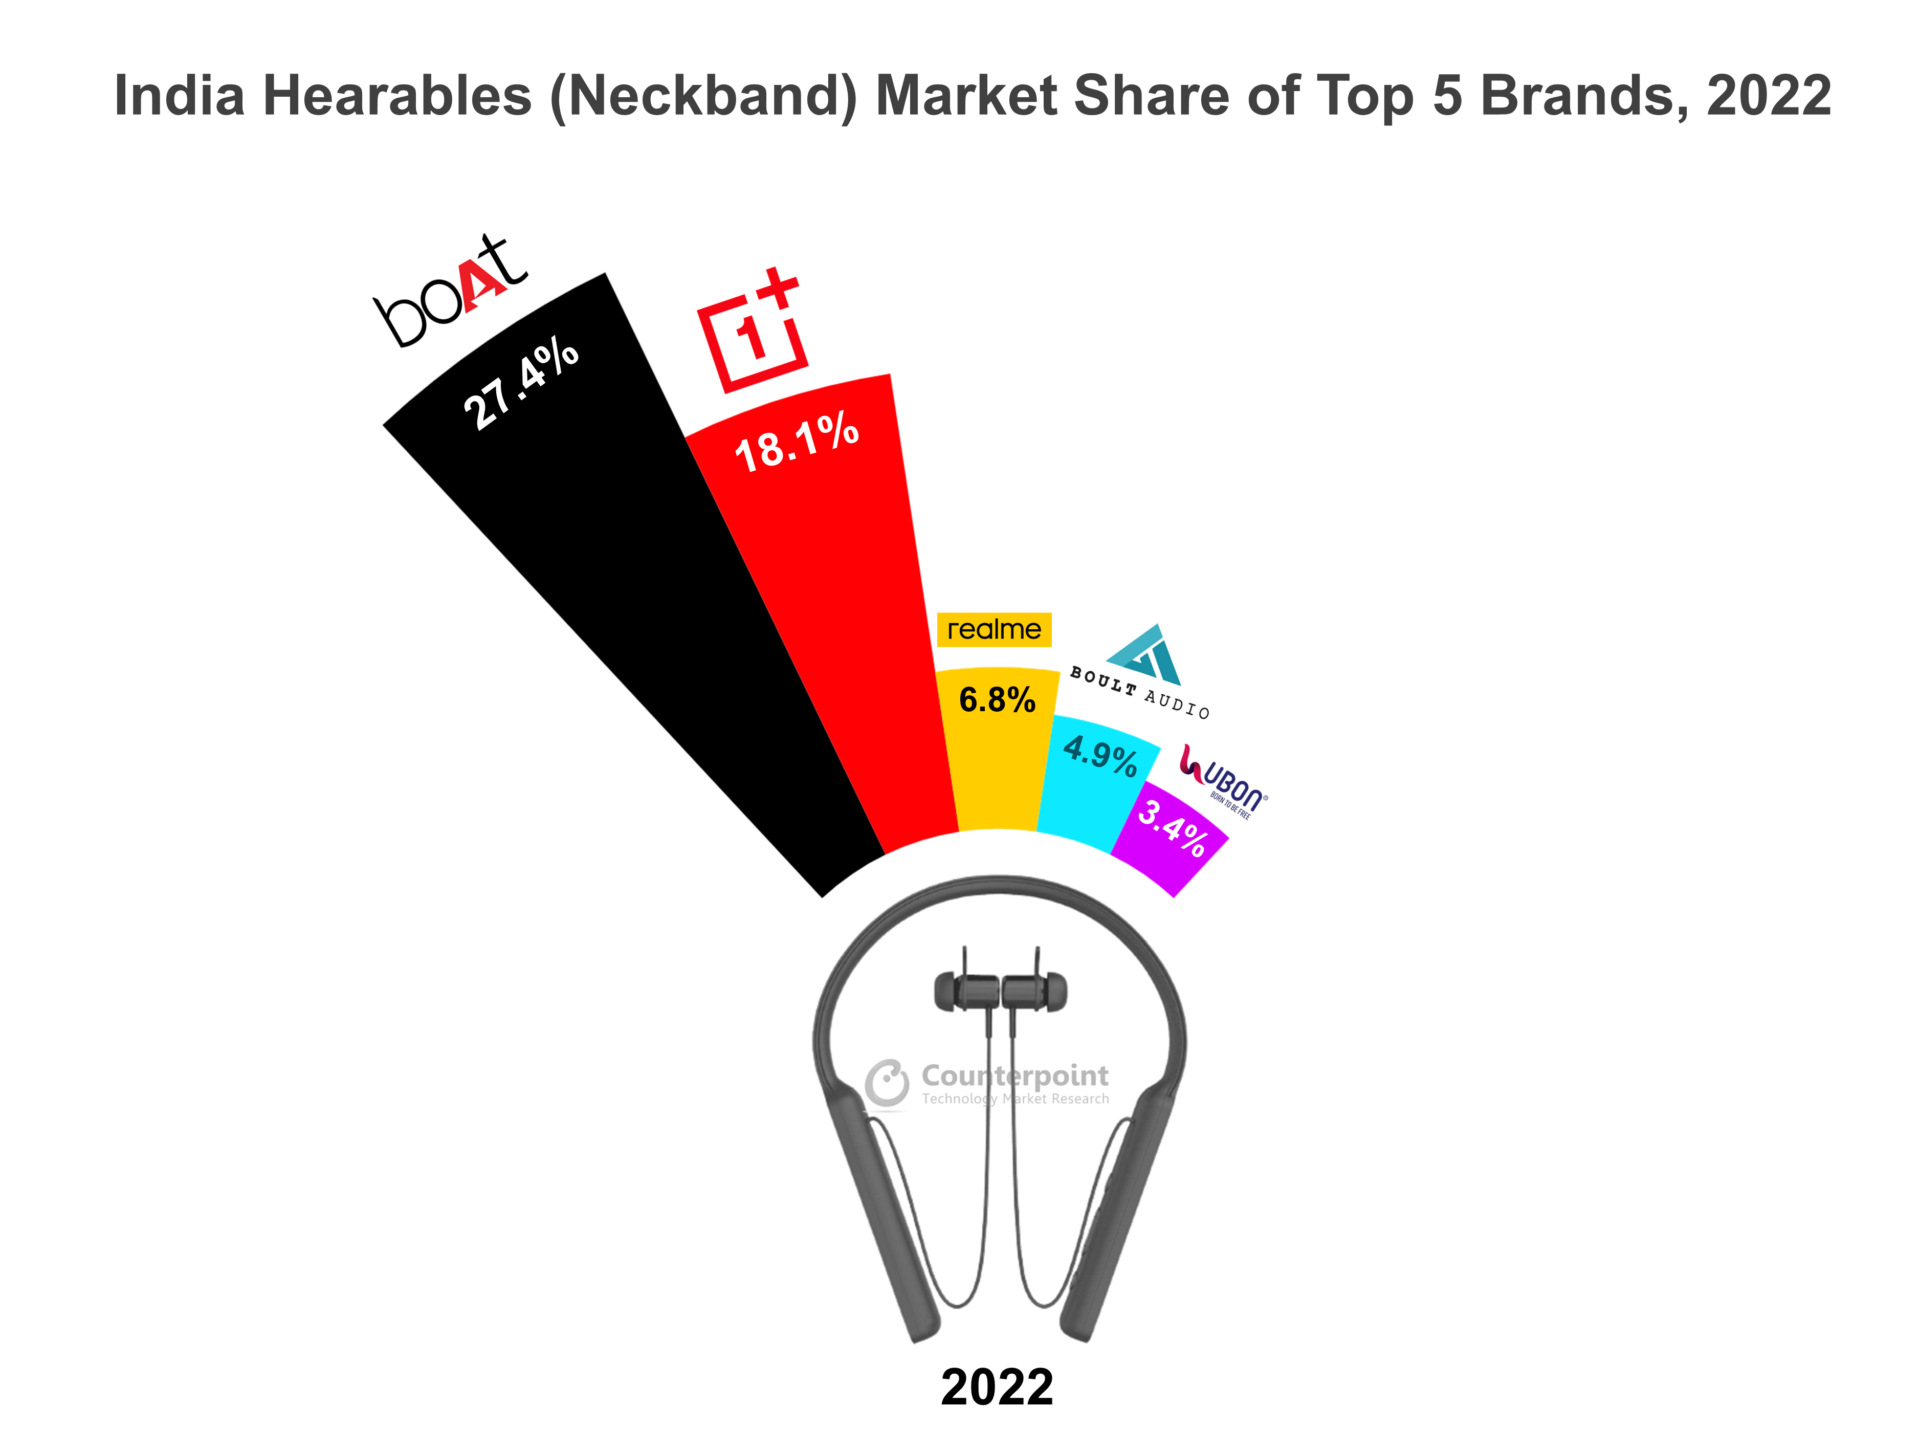 India Neckband (Hearables) Market Share of Top 5 Brands, 2022